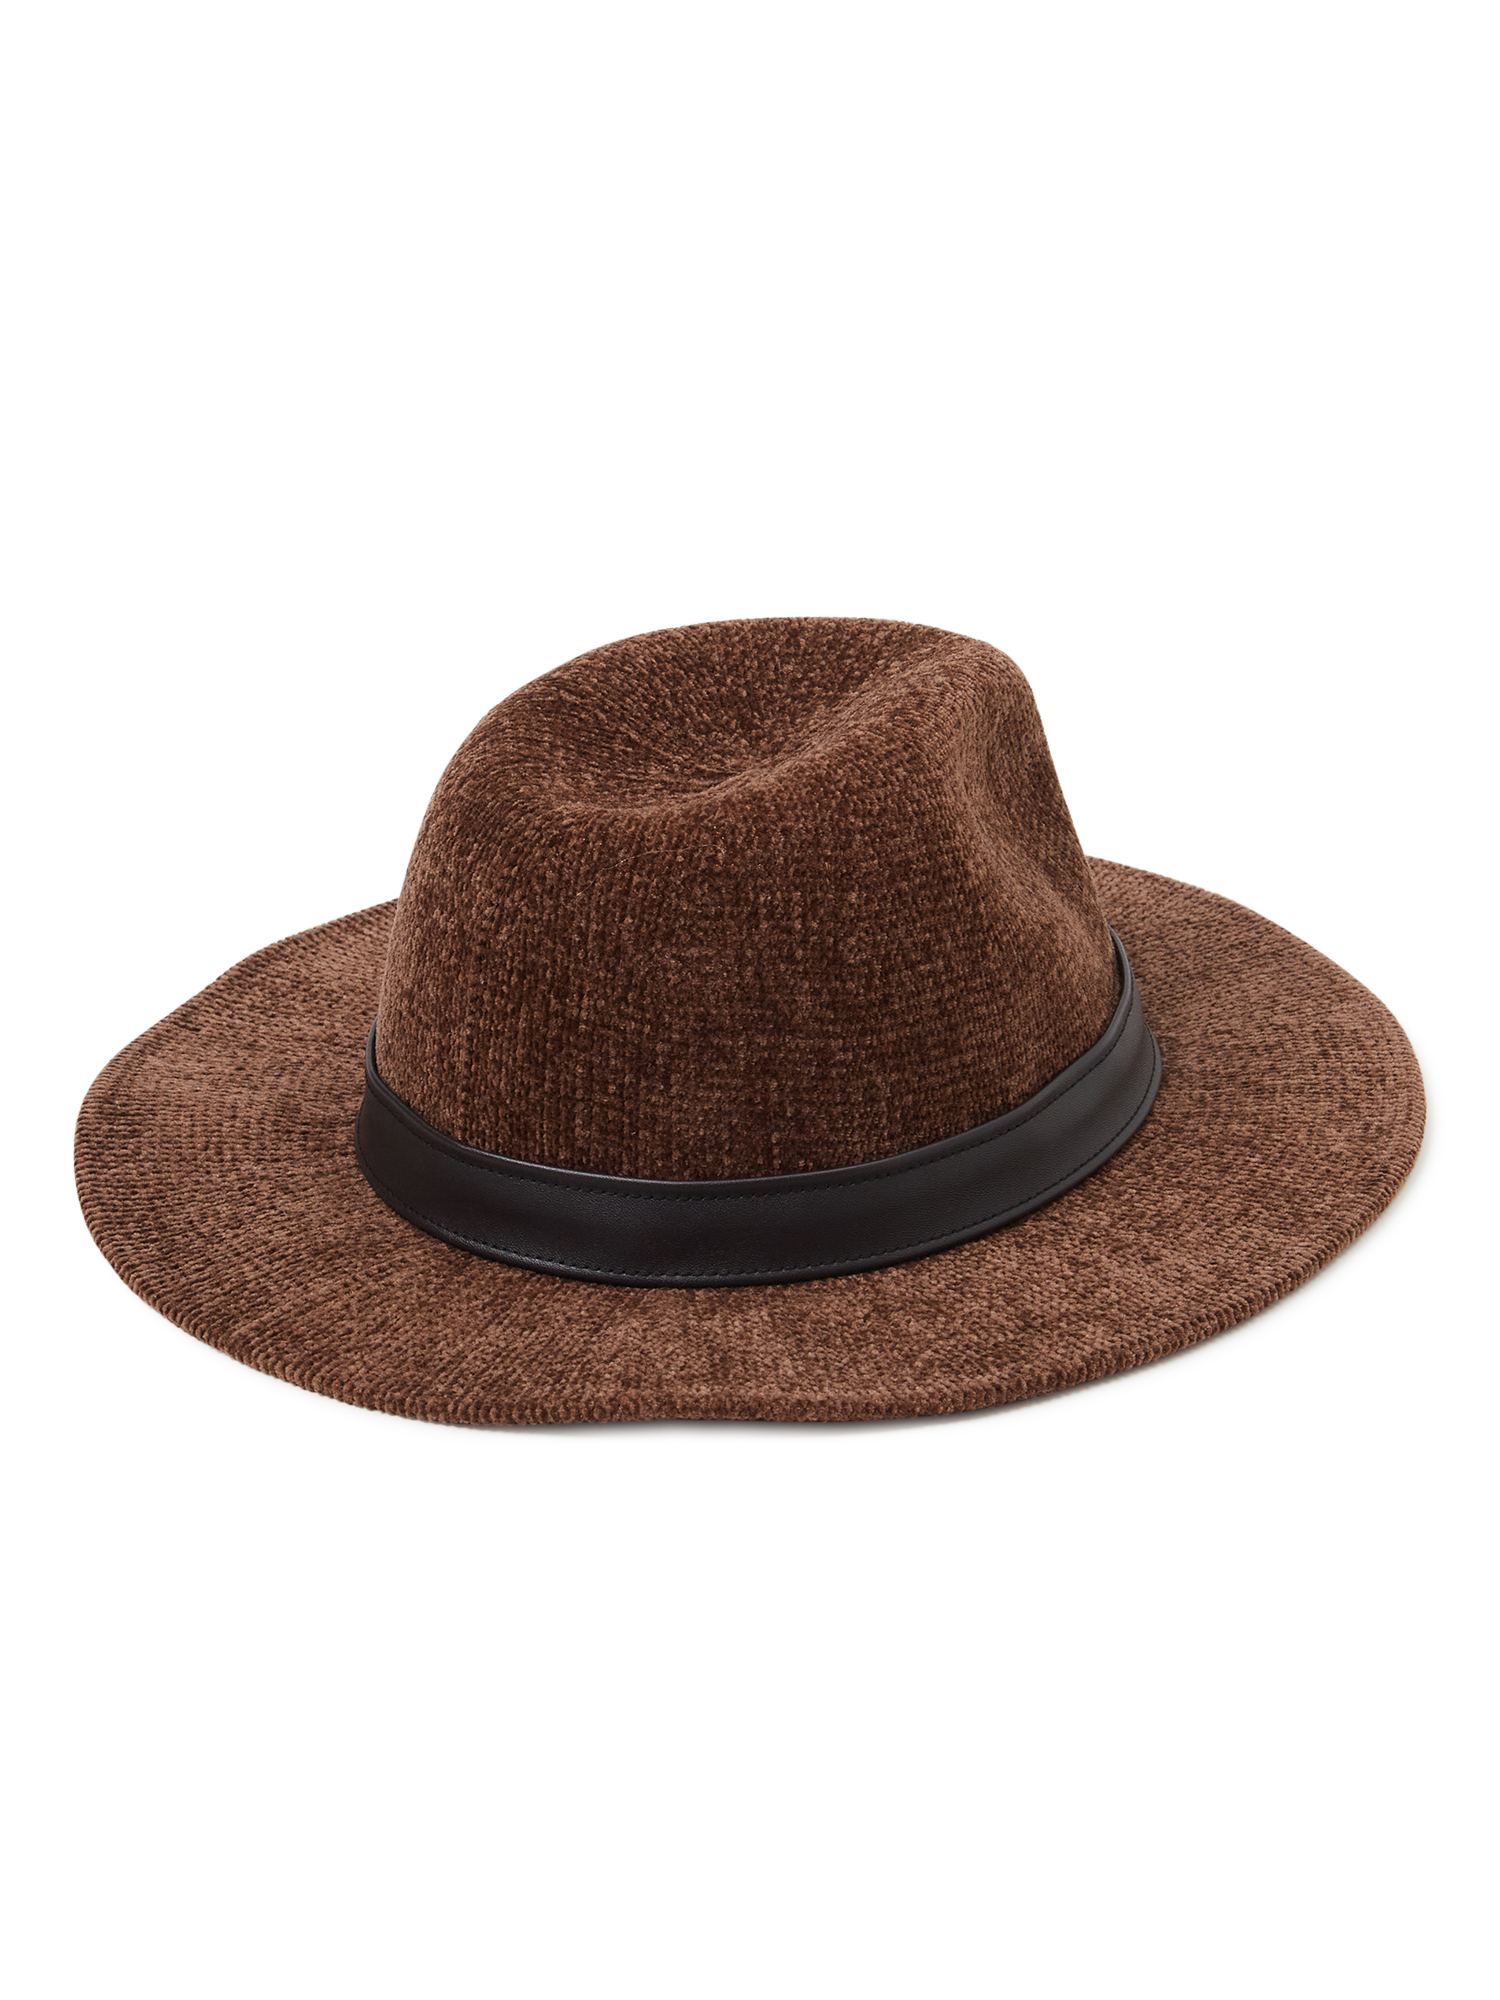 Scoop Adult Female Chenille Fedora with Faux Leather Trim - image 2 of 3